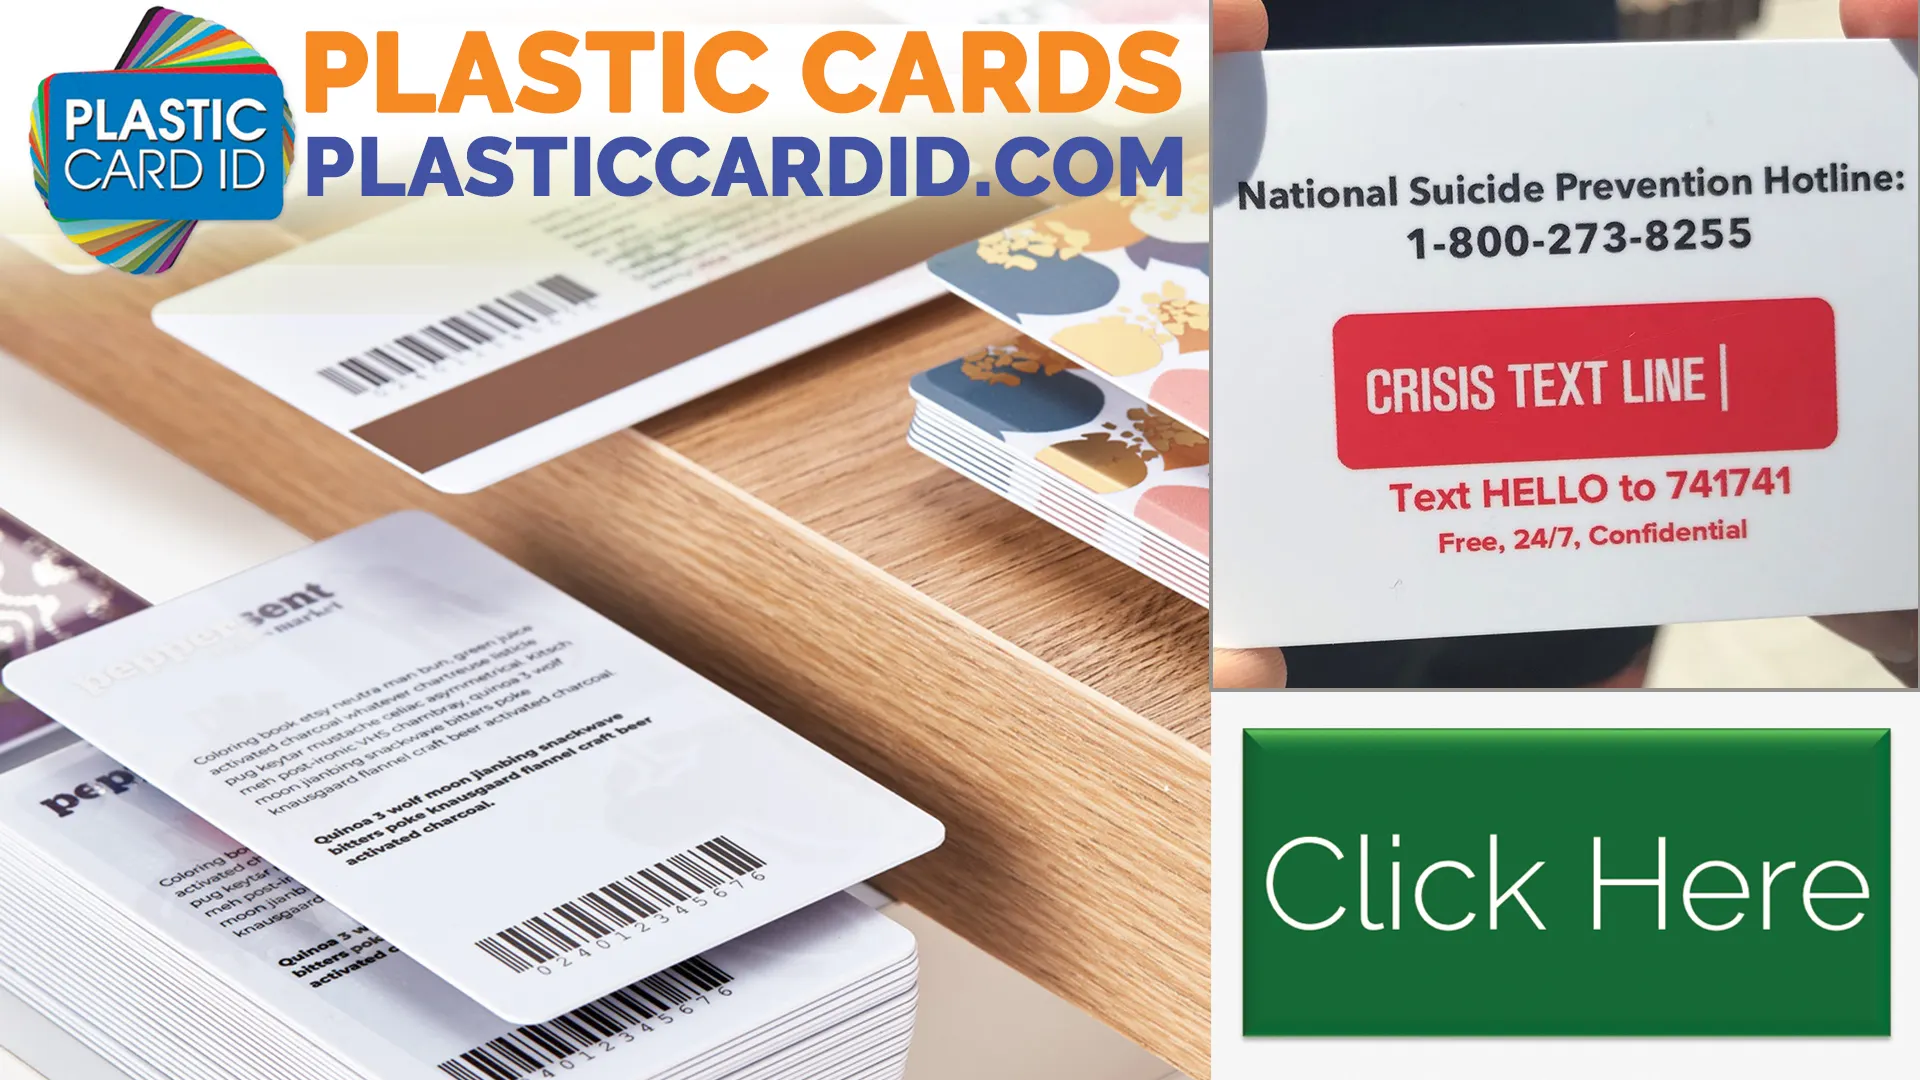 Accessorize Your Plastic Cards with the Right Tools